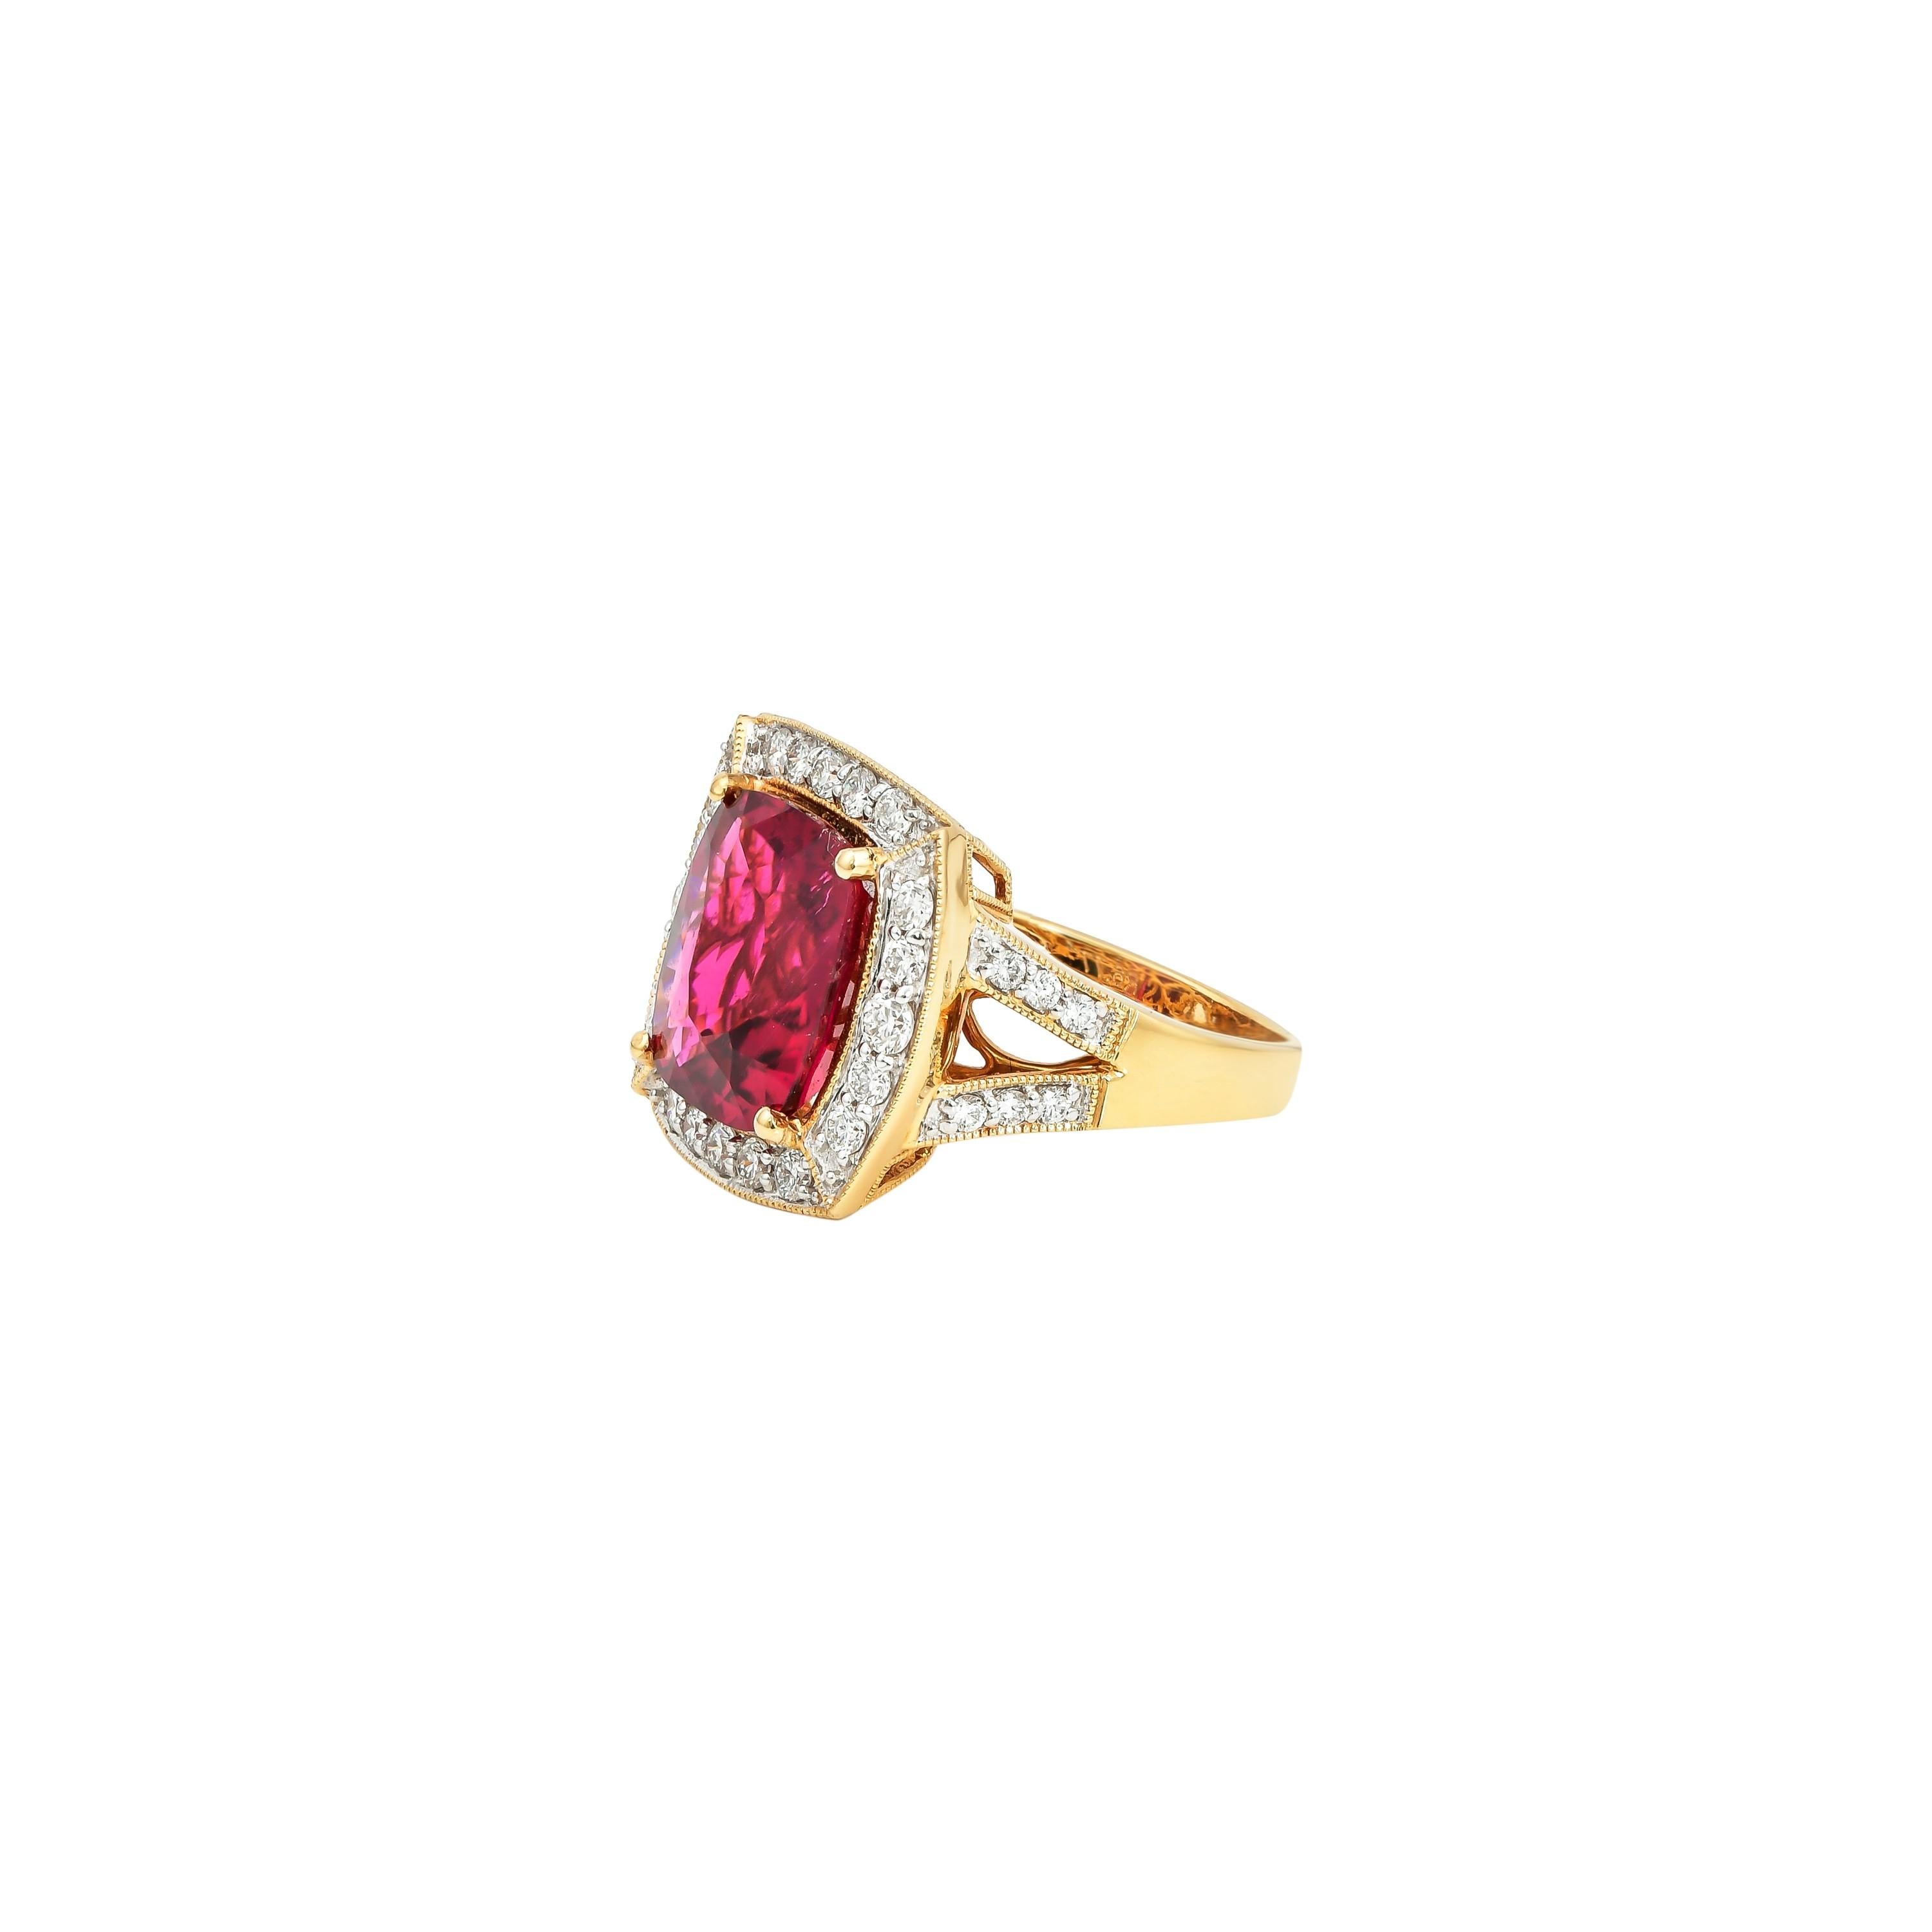 Contemporary 6.7 Carat Rubelite Tourmaline Ring with Diamond in 18 Karat Yellow Gold For Sale